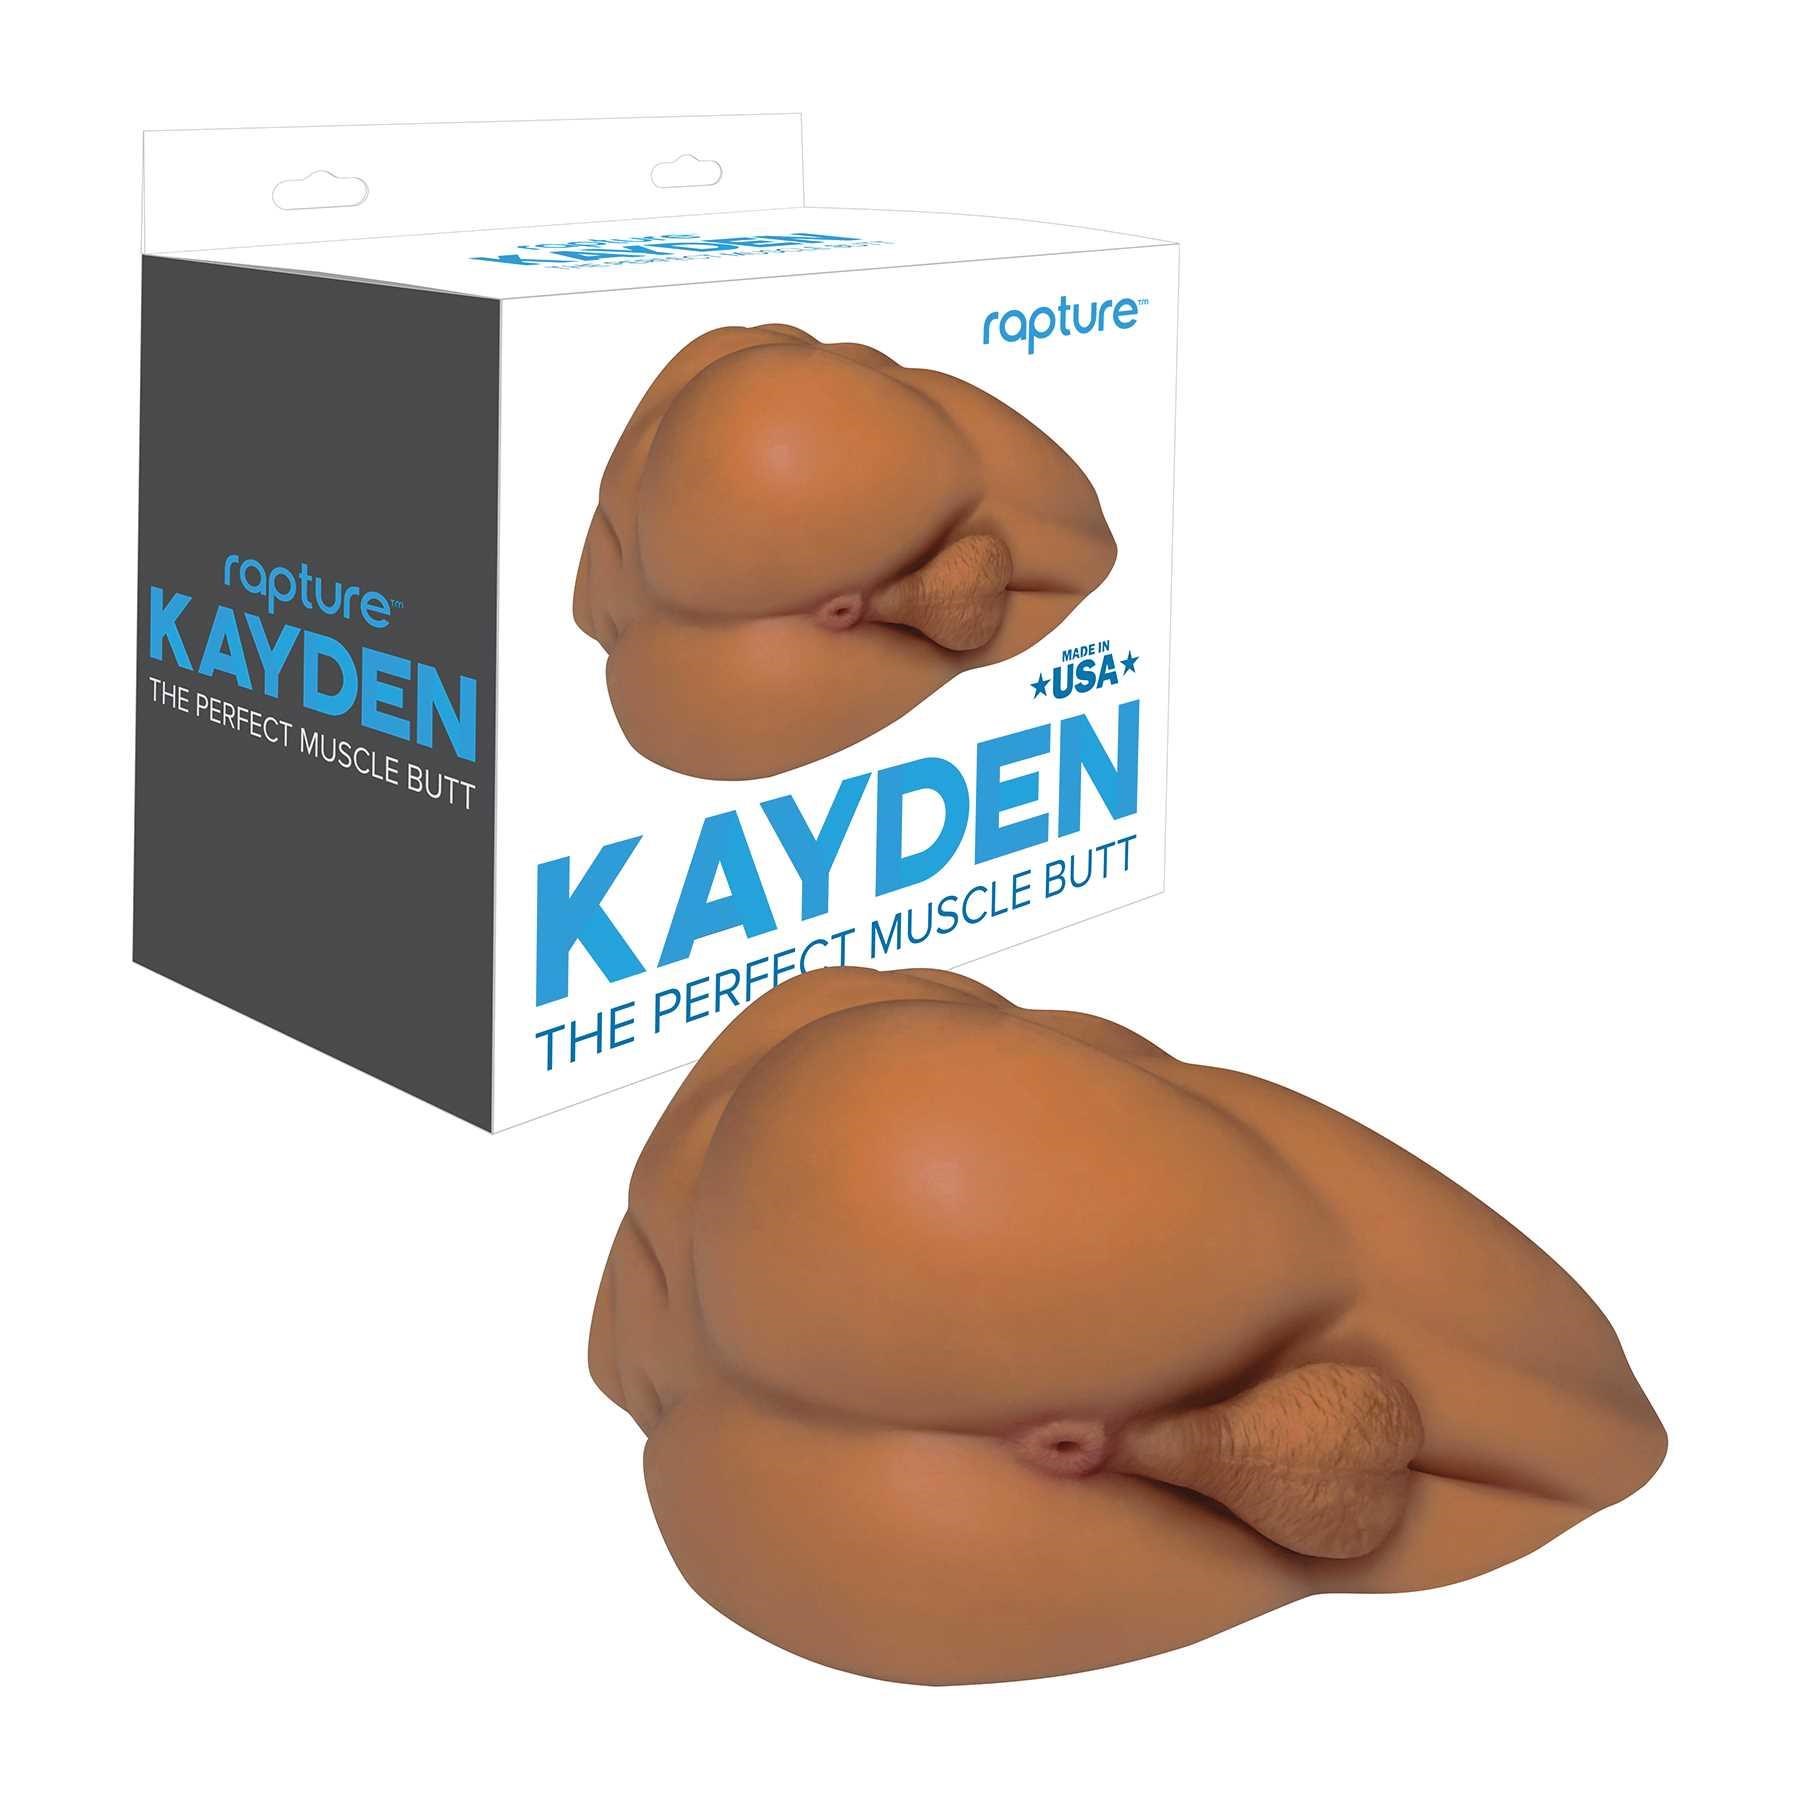 Kayden the Perfect Muscle Butt product and box